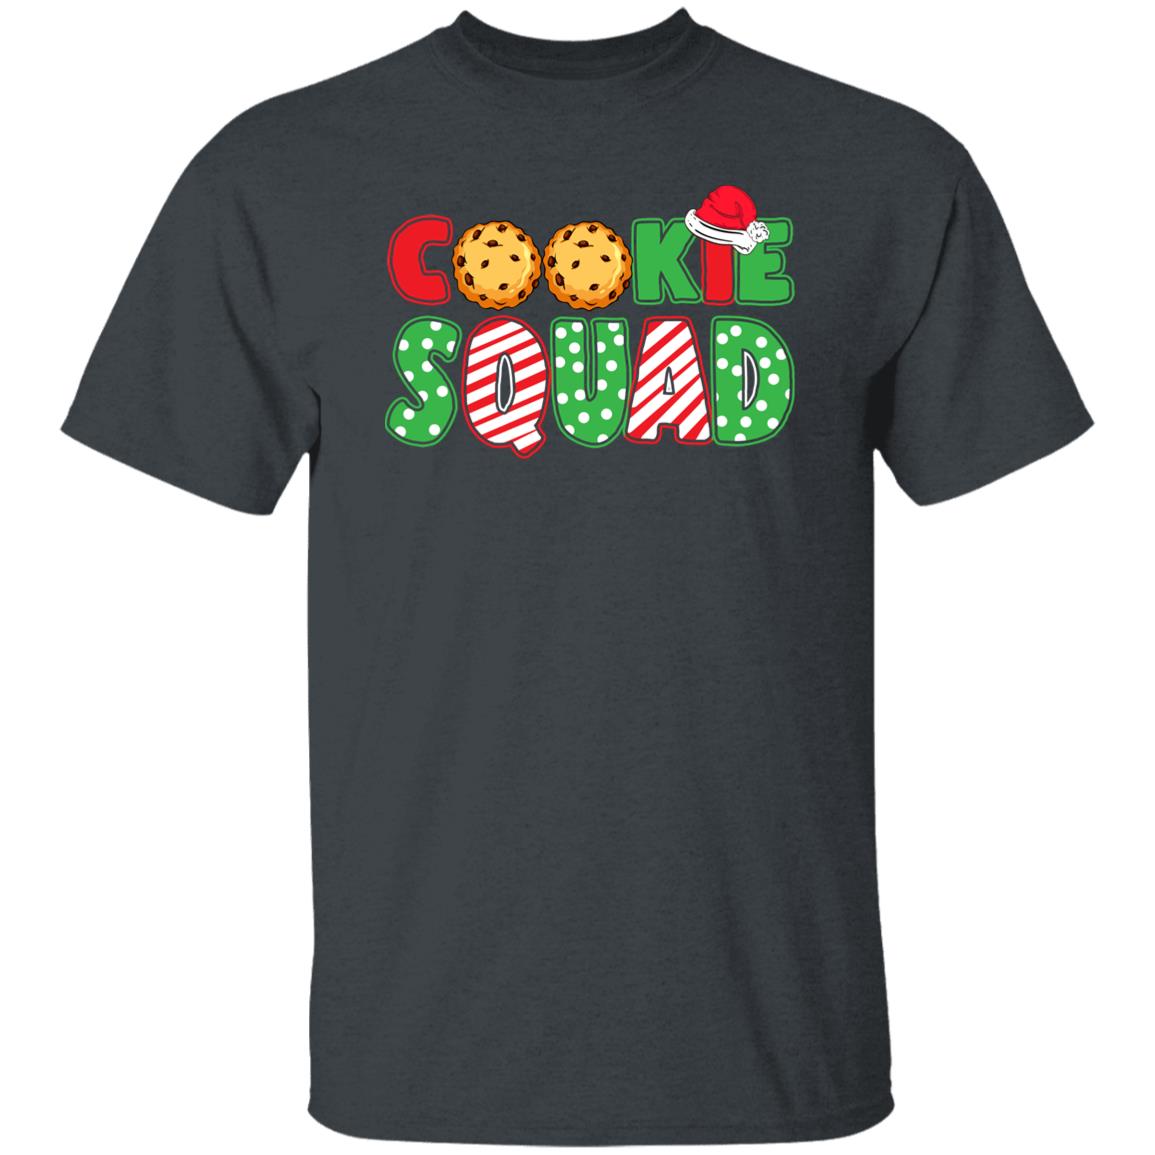 Cookie Squad Christmas Unisex Shirt Holiday tee Black Dark Heather-Family-Gift-Planet